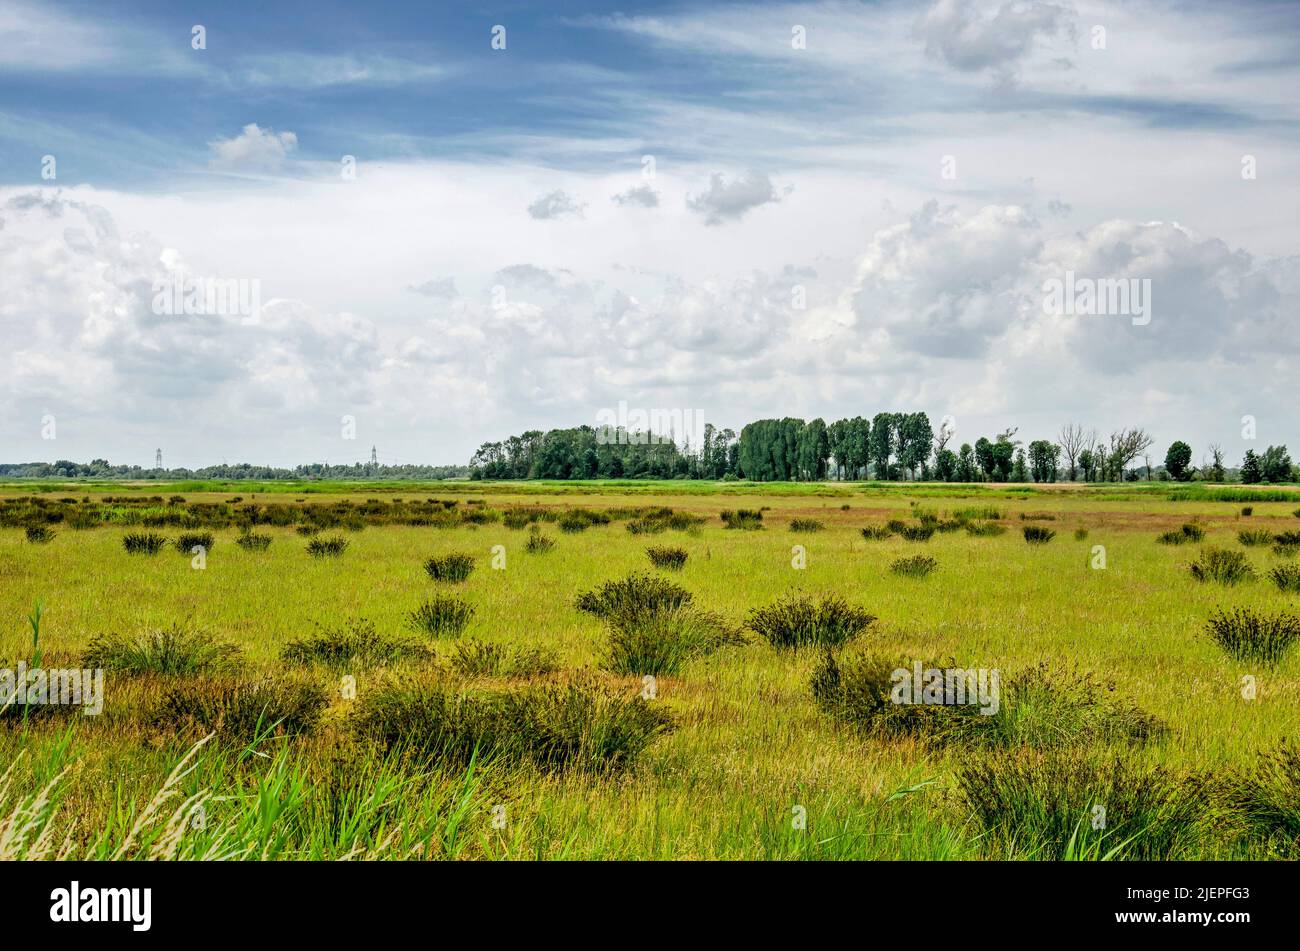 Landscape with clumps of grass in a swampy part of the Noordwaard region in Biesbosch national park Stock Photo